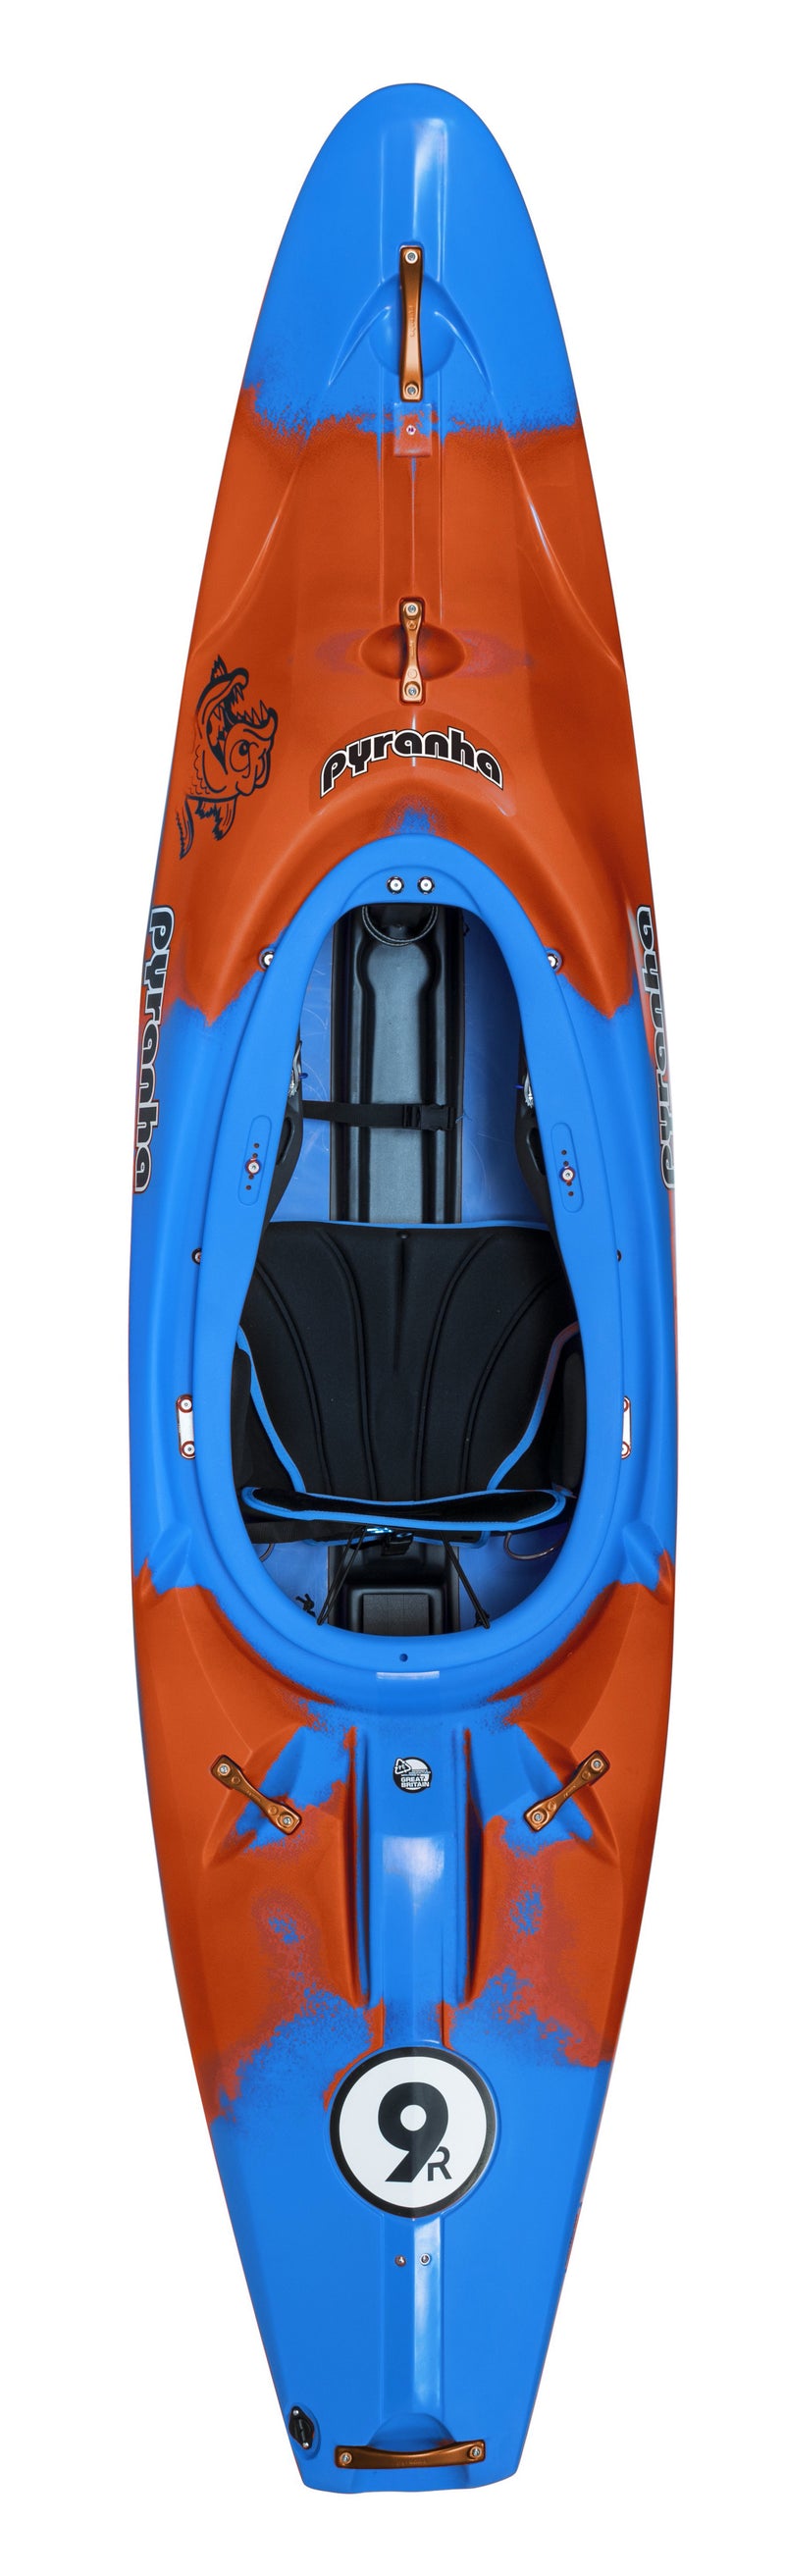 Load image into Gallery viewer, 9R II Whitewater Kayak
